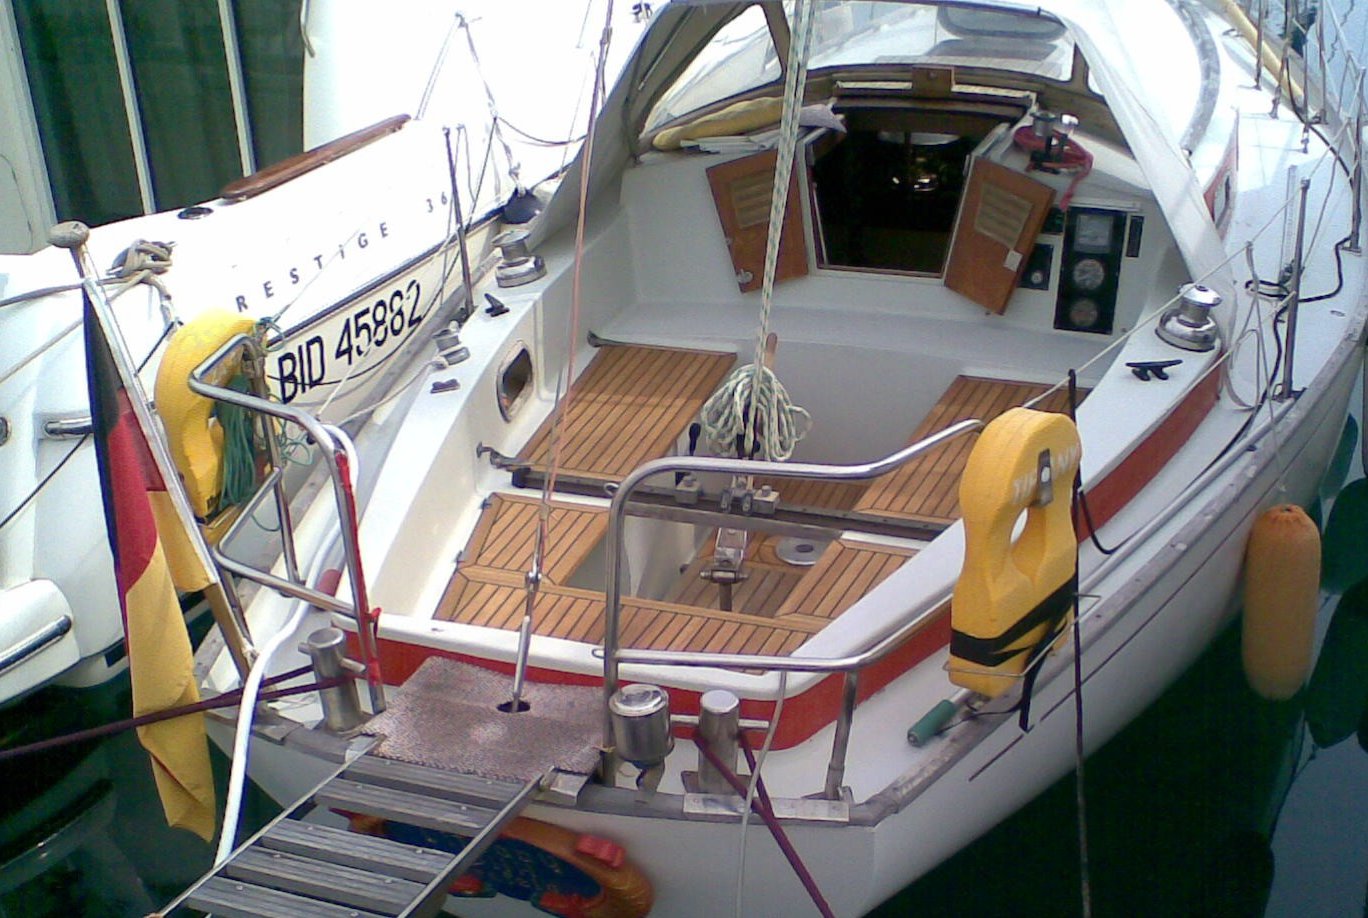 View on a teakdeck for the cockpit